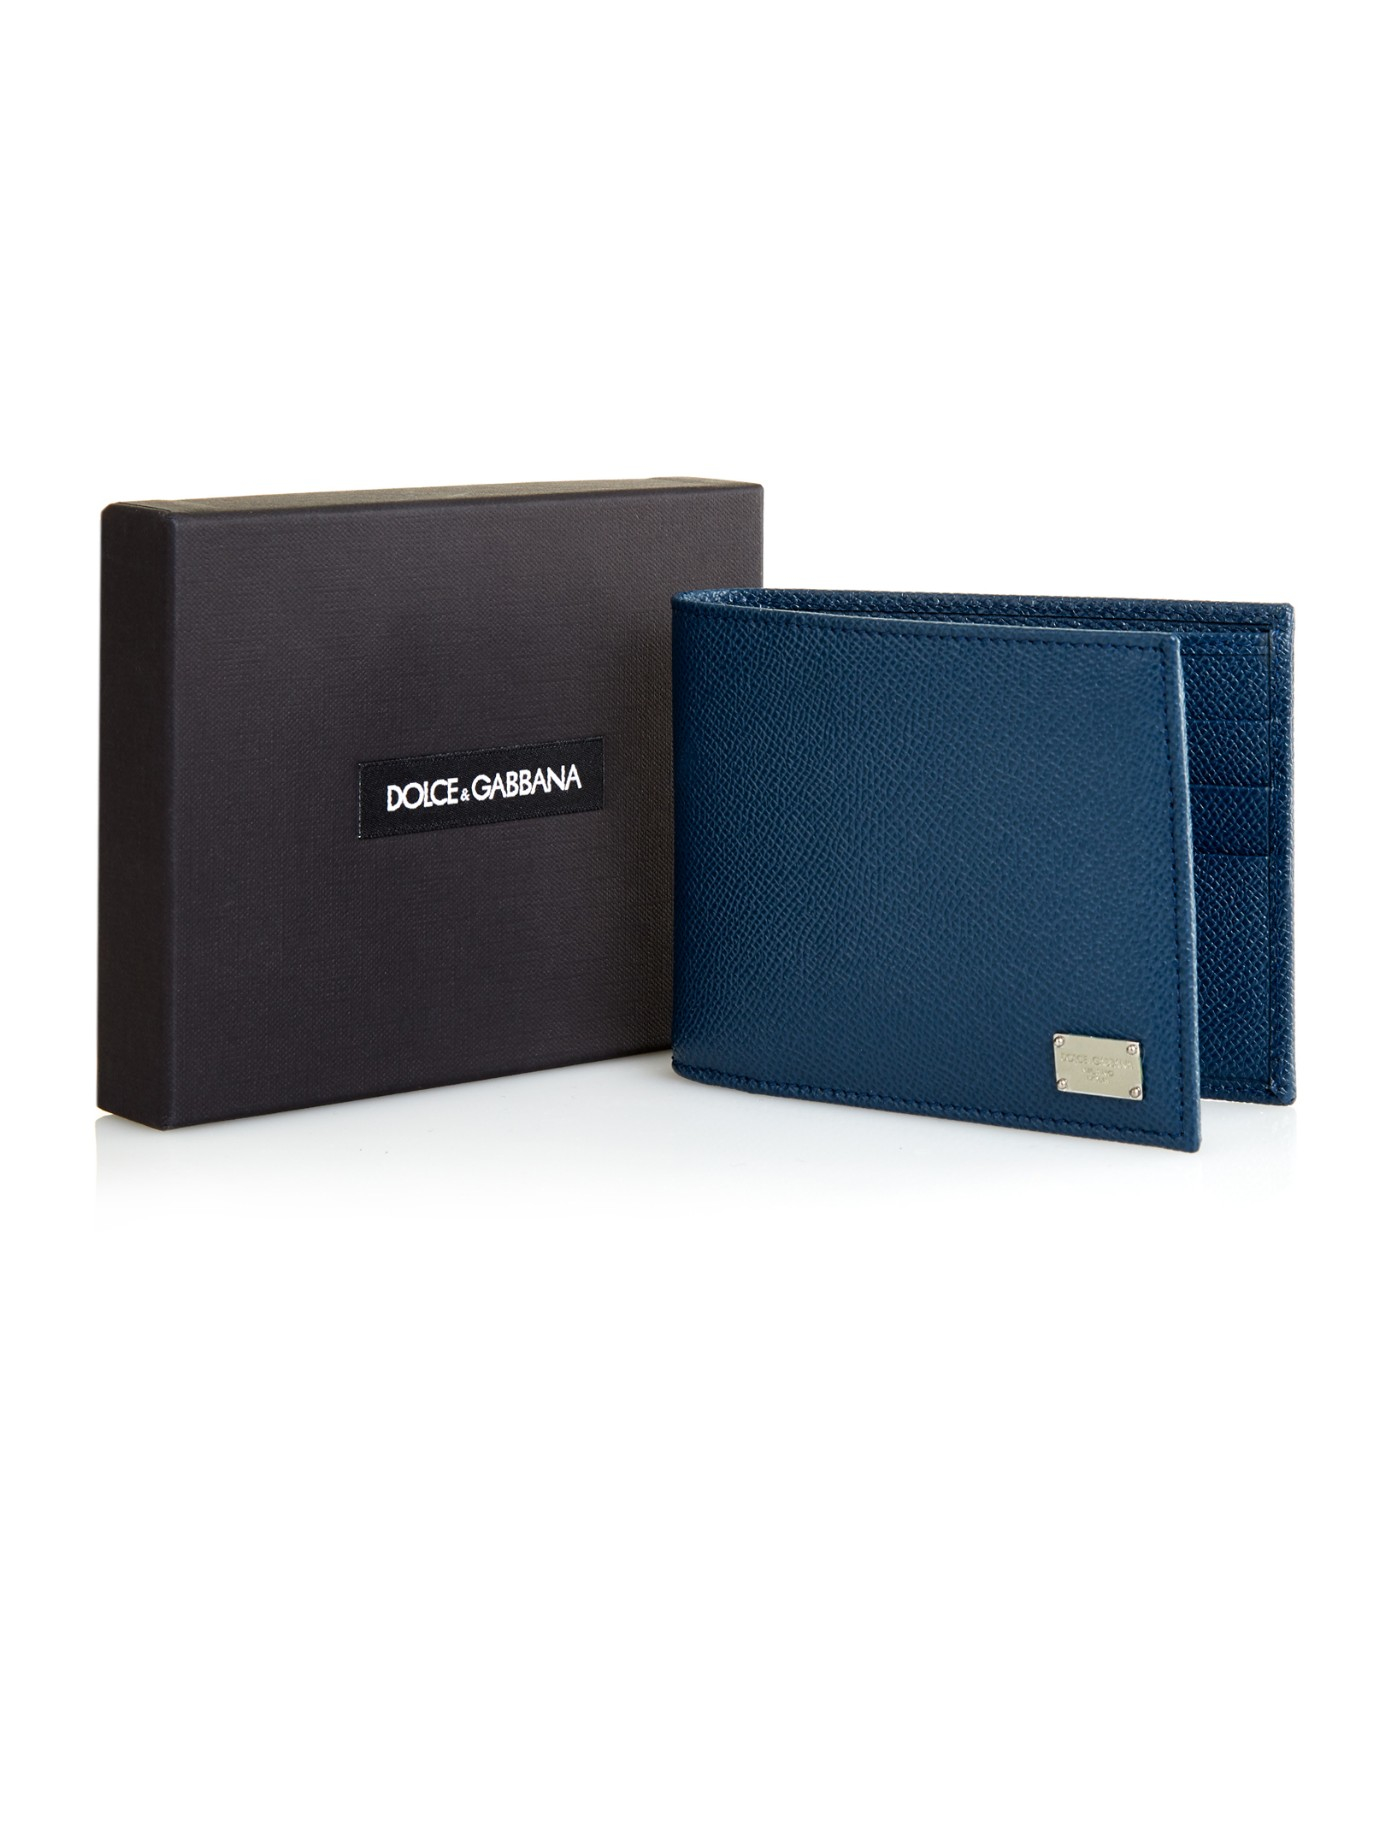 Dolce & Gabbana Grained-leather Wallet in Blue for Men | Lyst